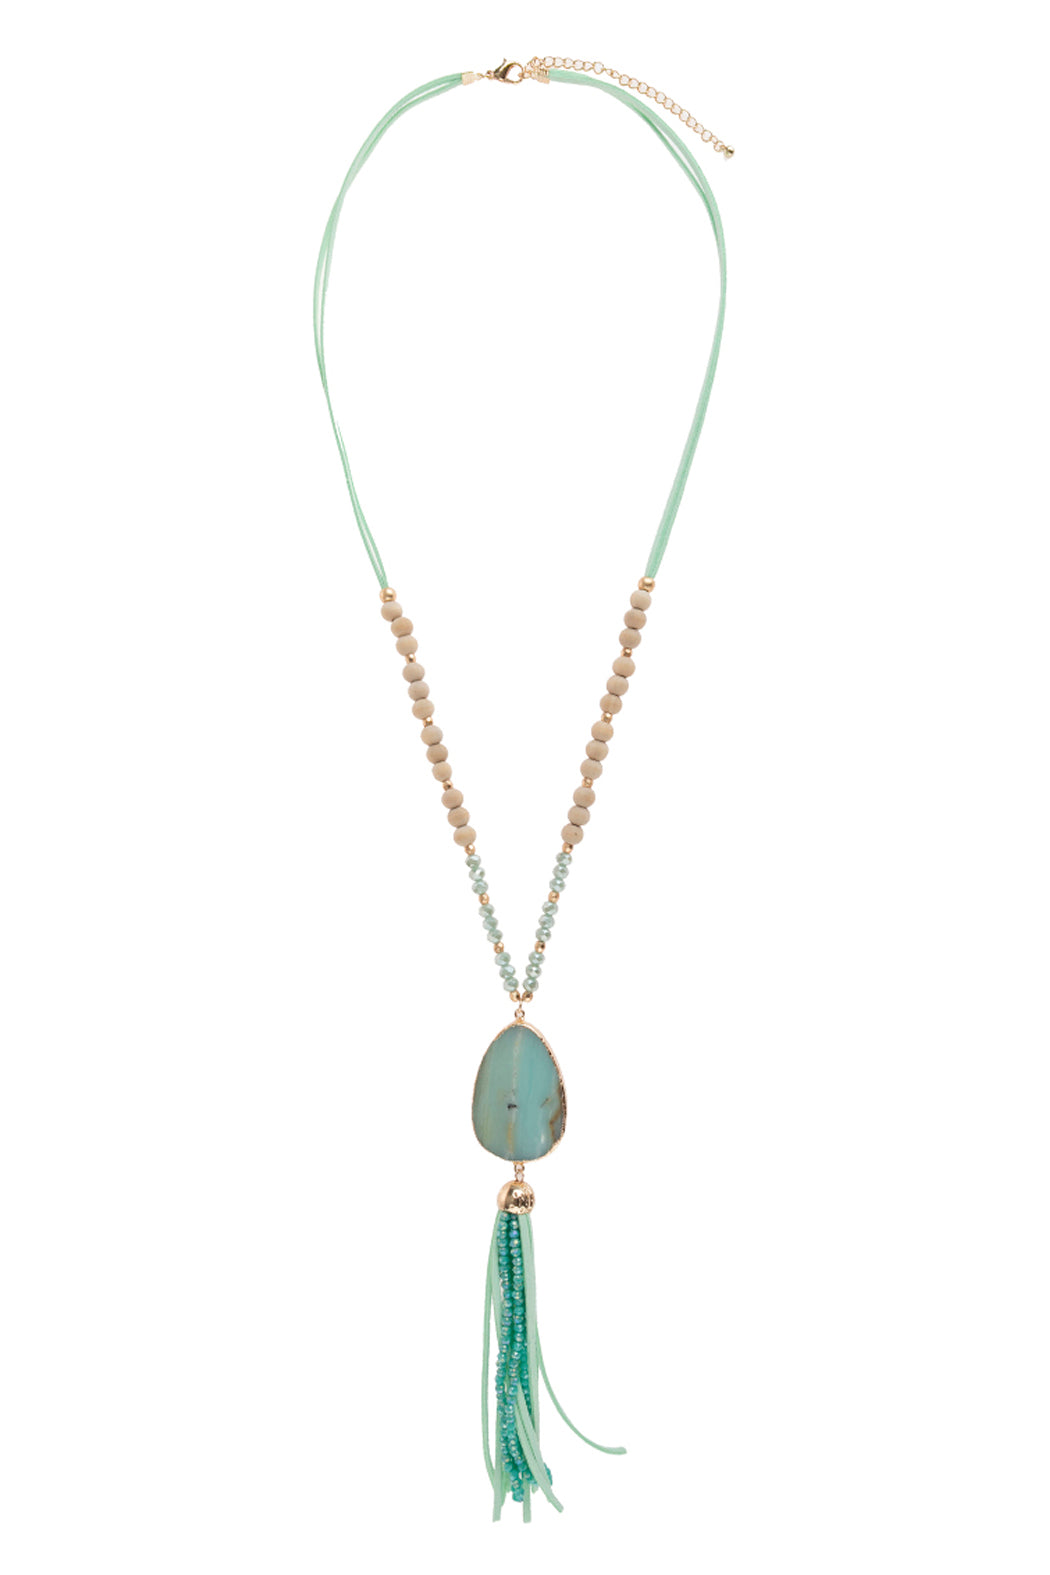 NATURAL STONE WITH TASSEL PENDANT NECKLACE